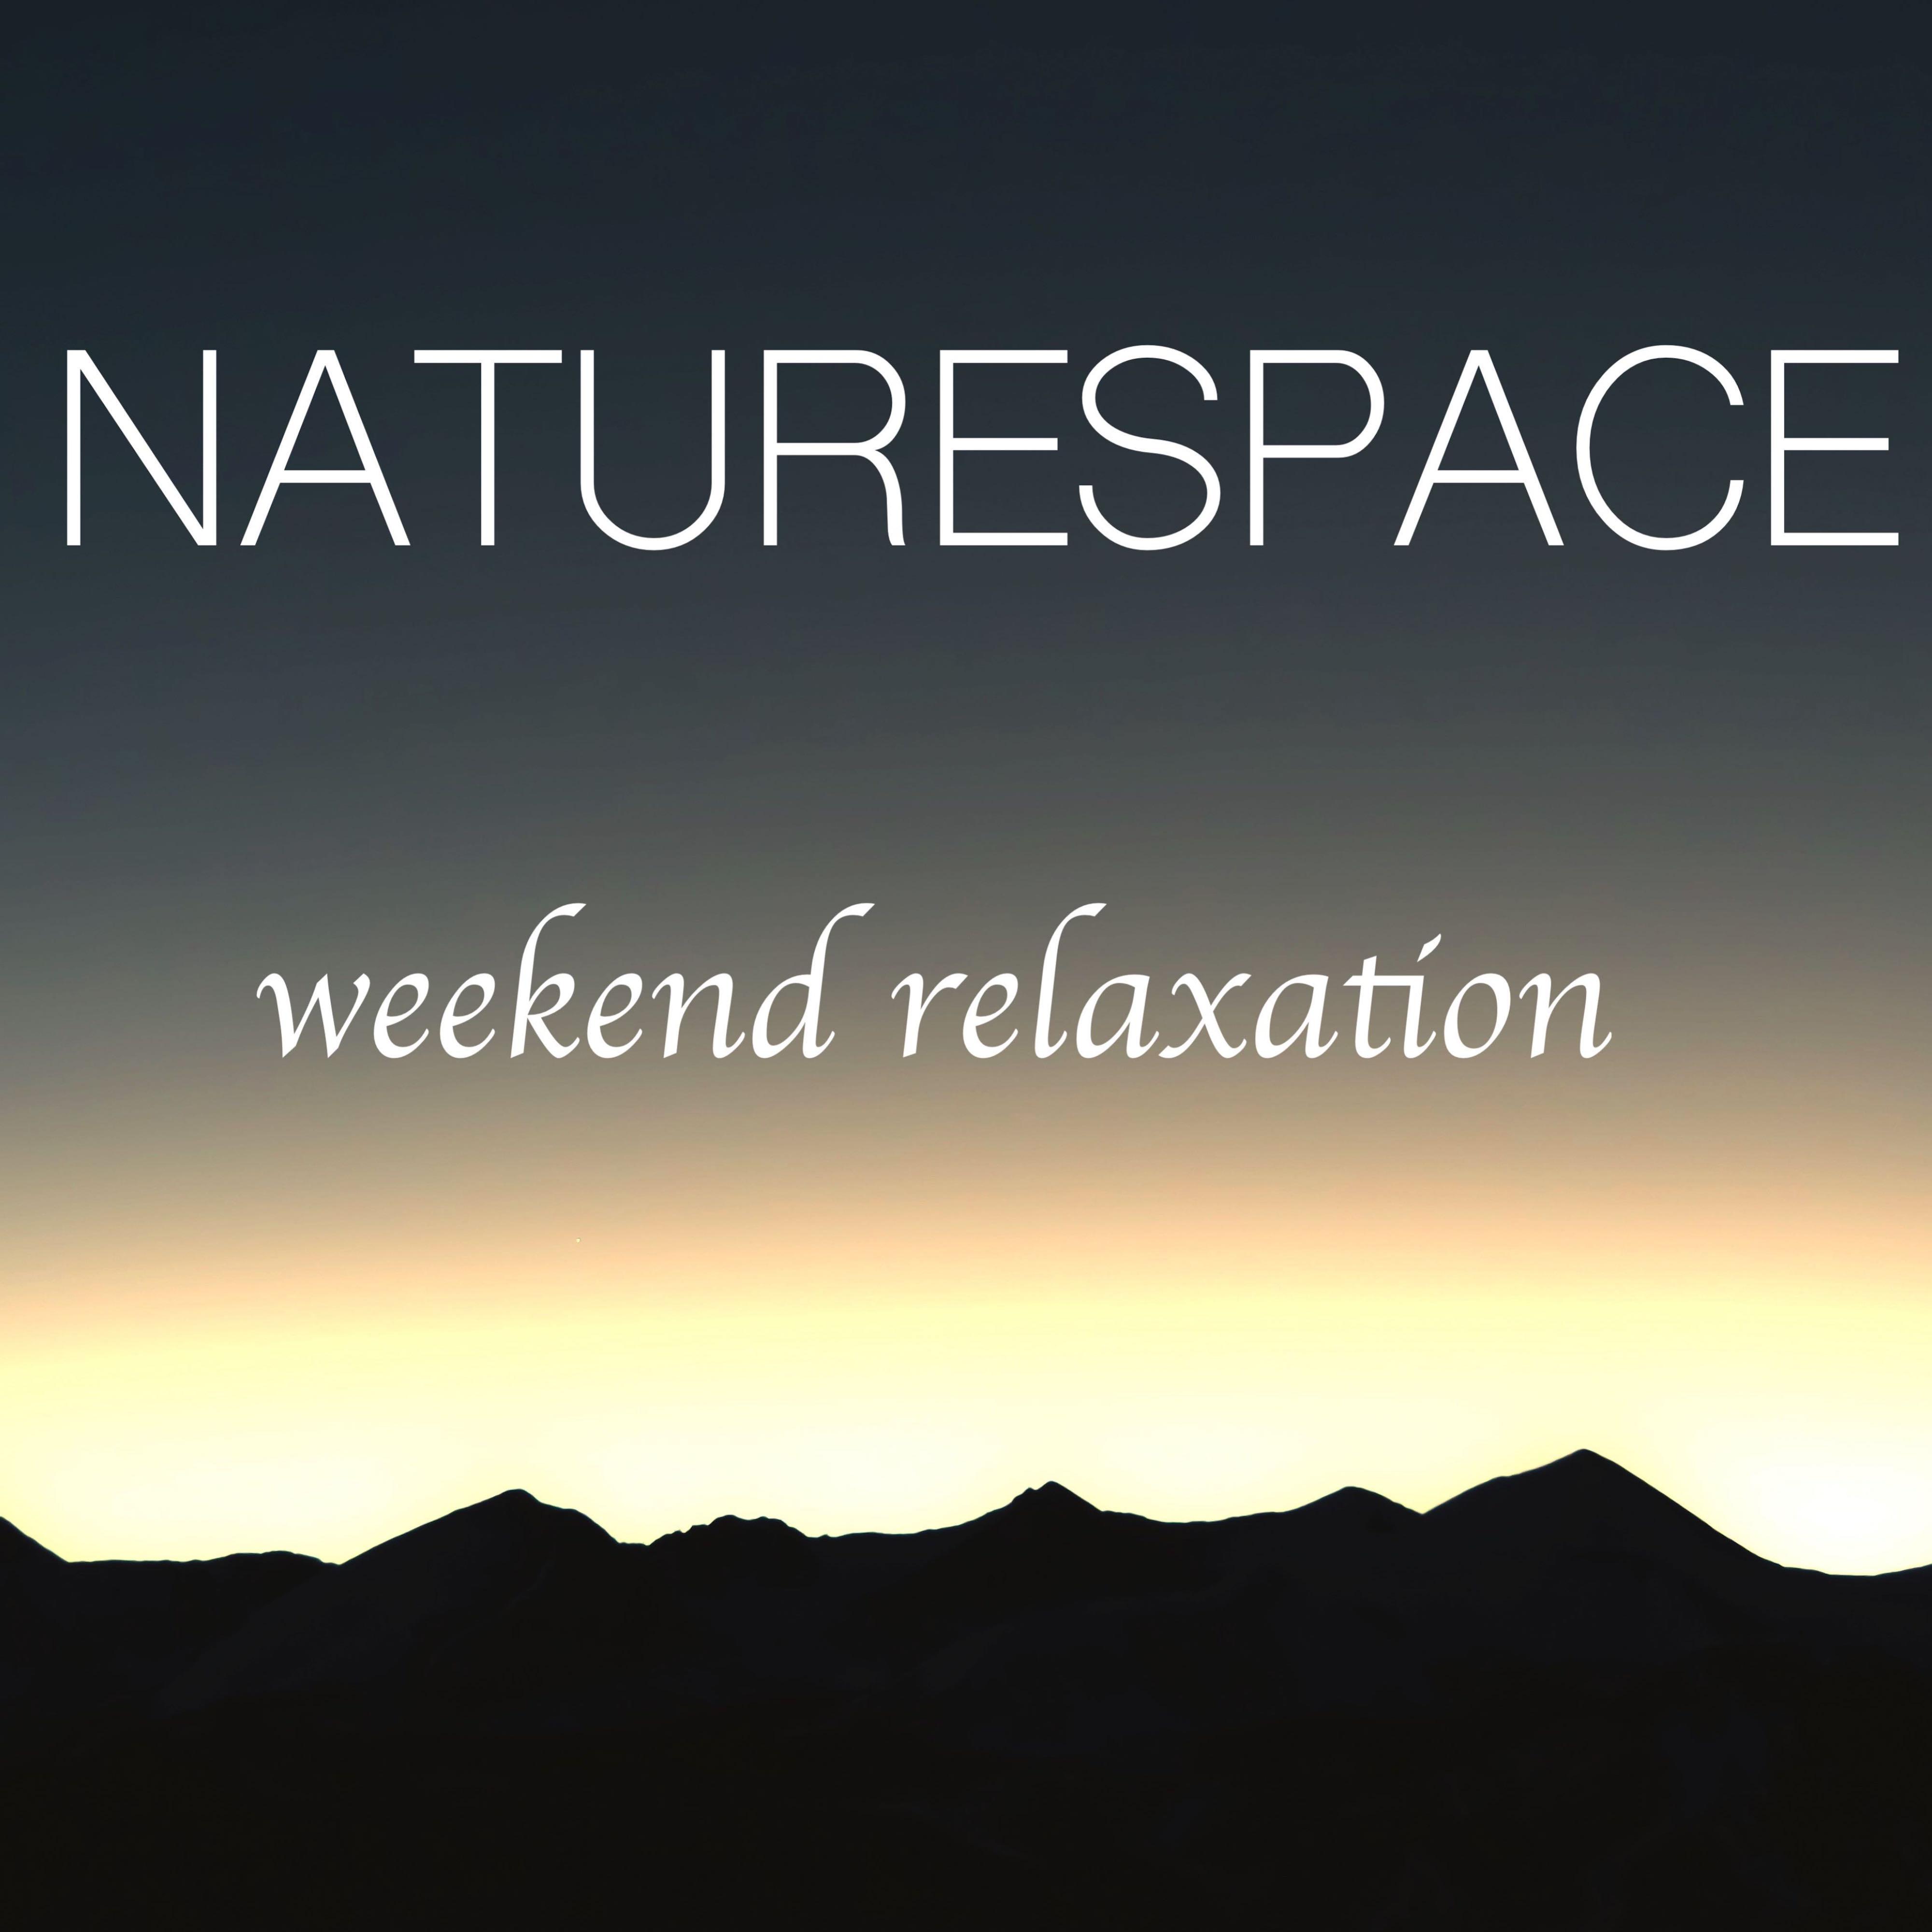 Naturespace Weekend Relaxation